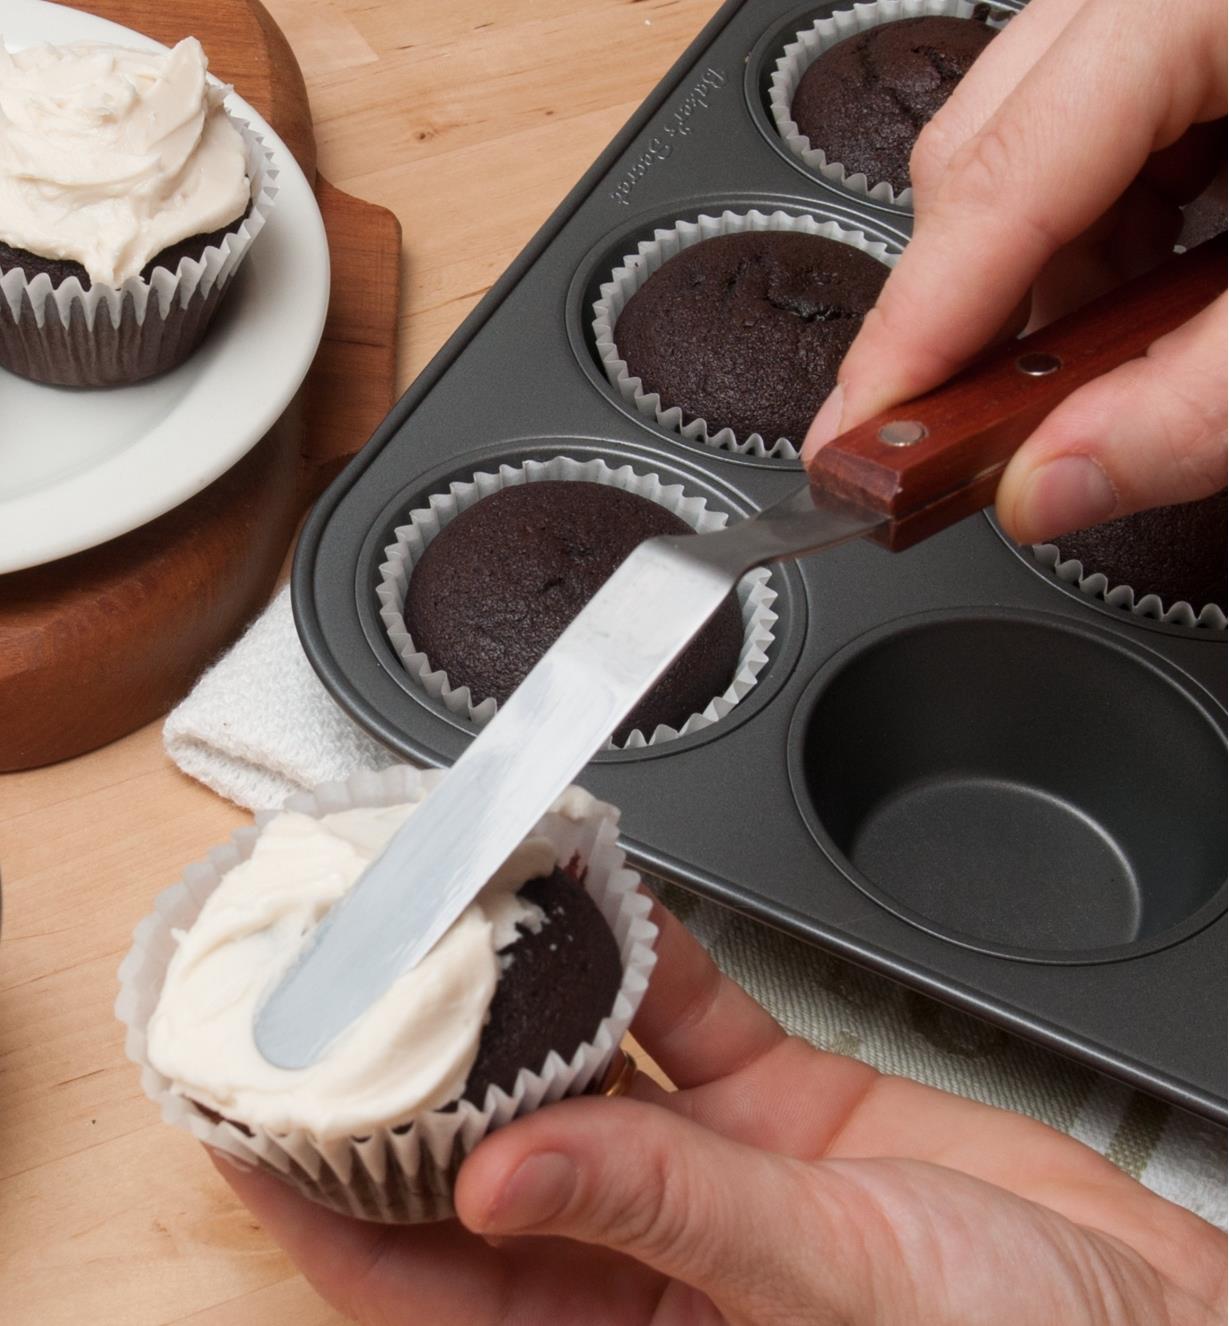 Using the blade tip of the spatula to spread frosting on a cupcake